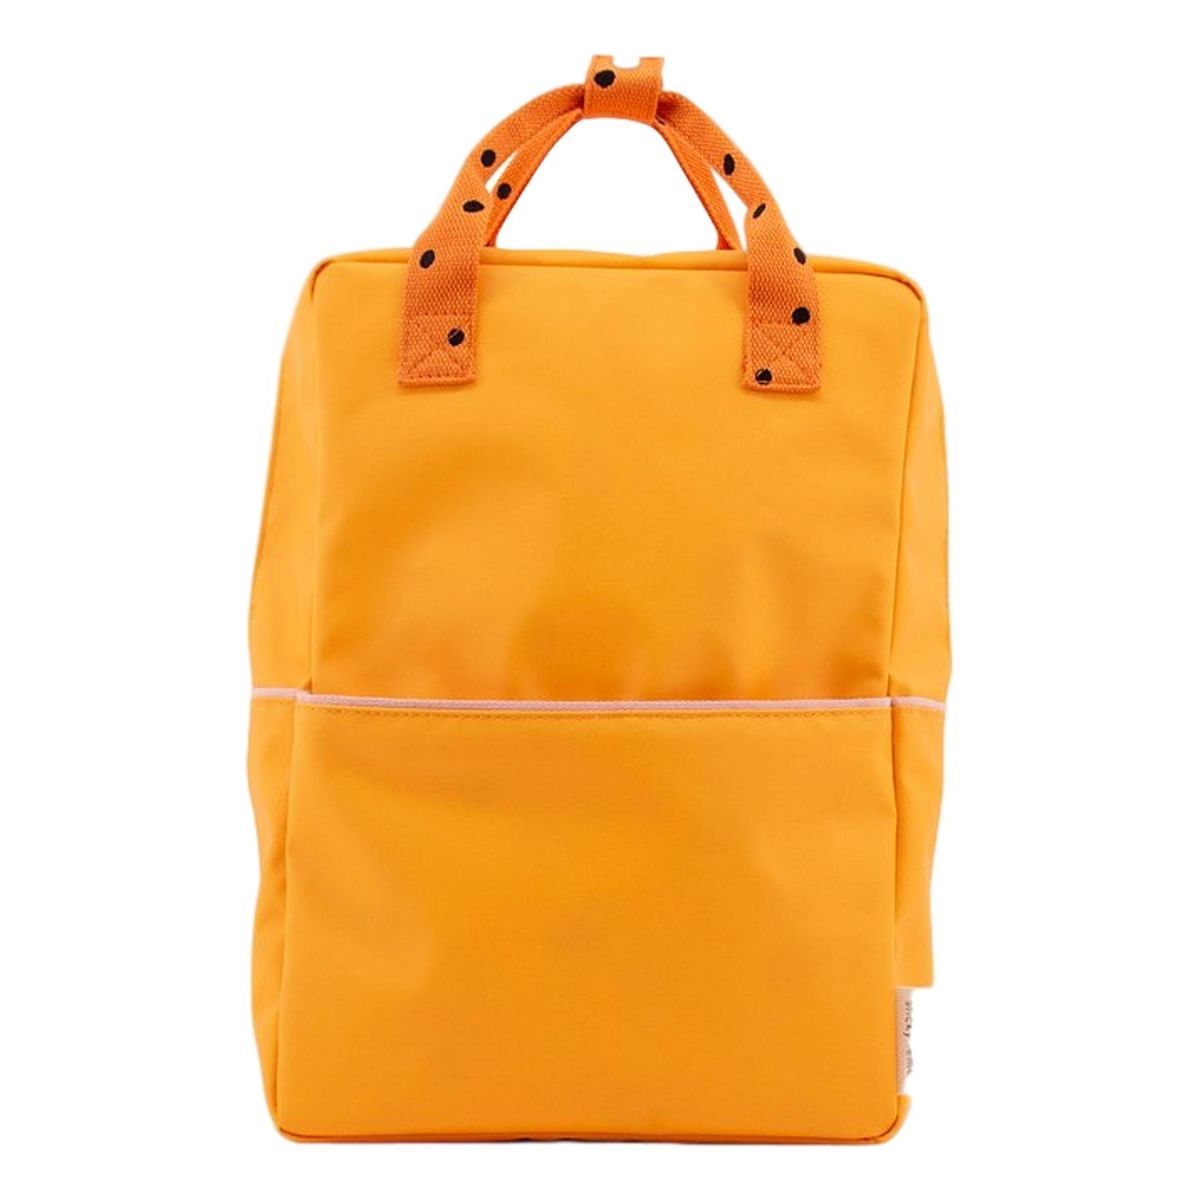 Sticky Lemon - Backpack large / Freckles Sunny yellow -